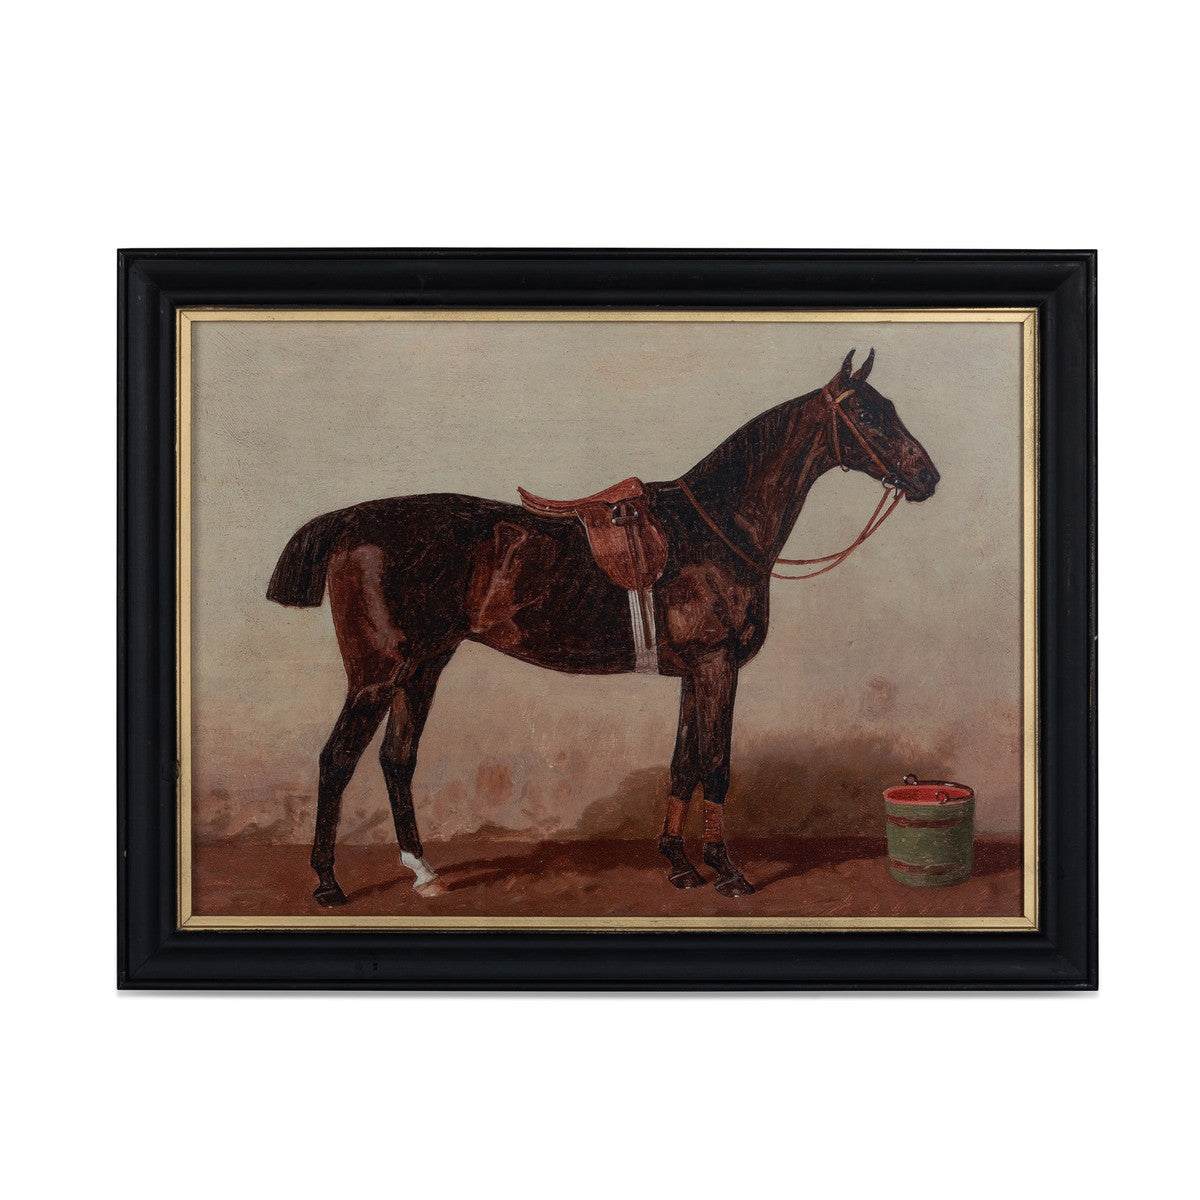 English Riding Horses Framed Print - 4 Assorted Styles